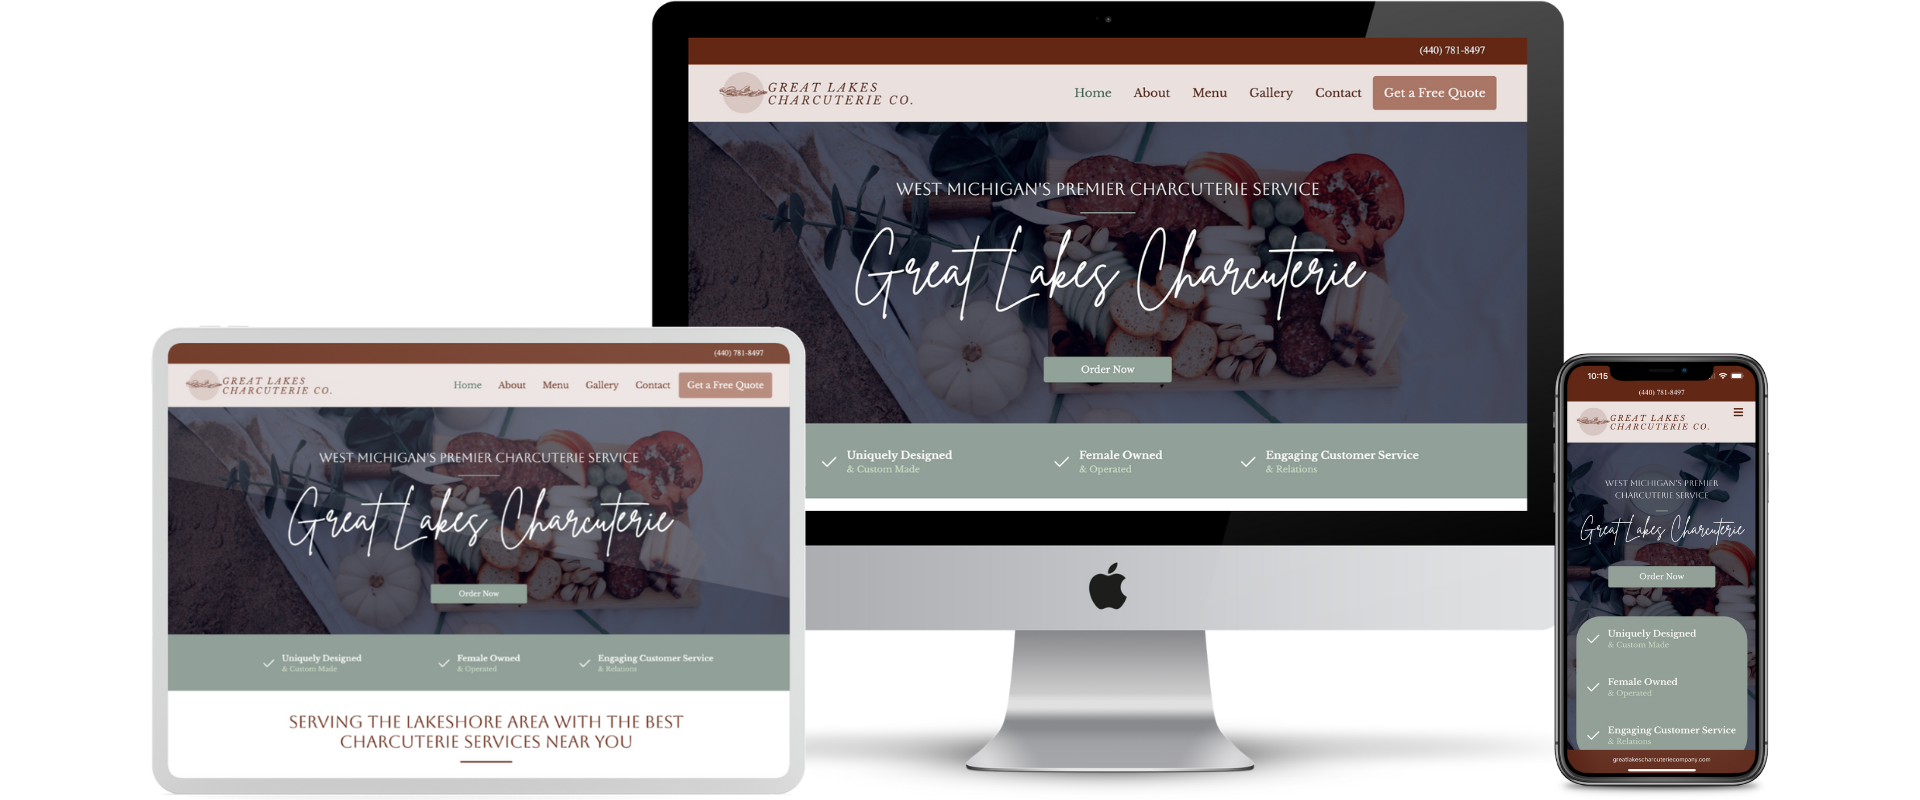 responsive web design: great lakes charcuterie company